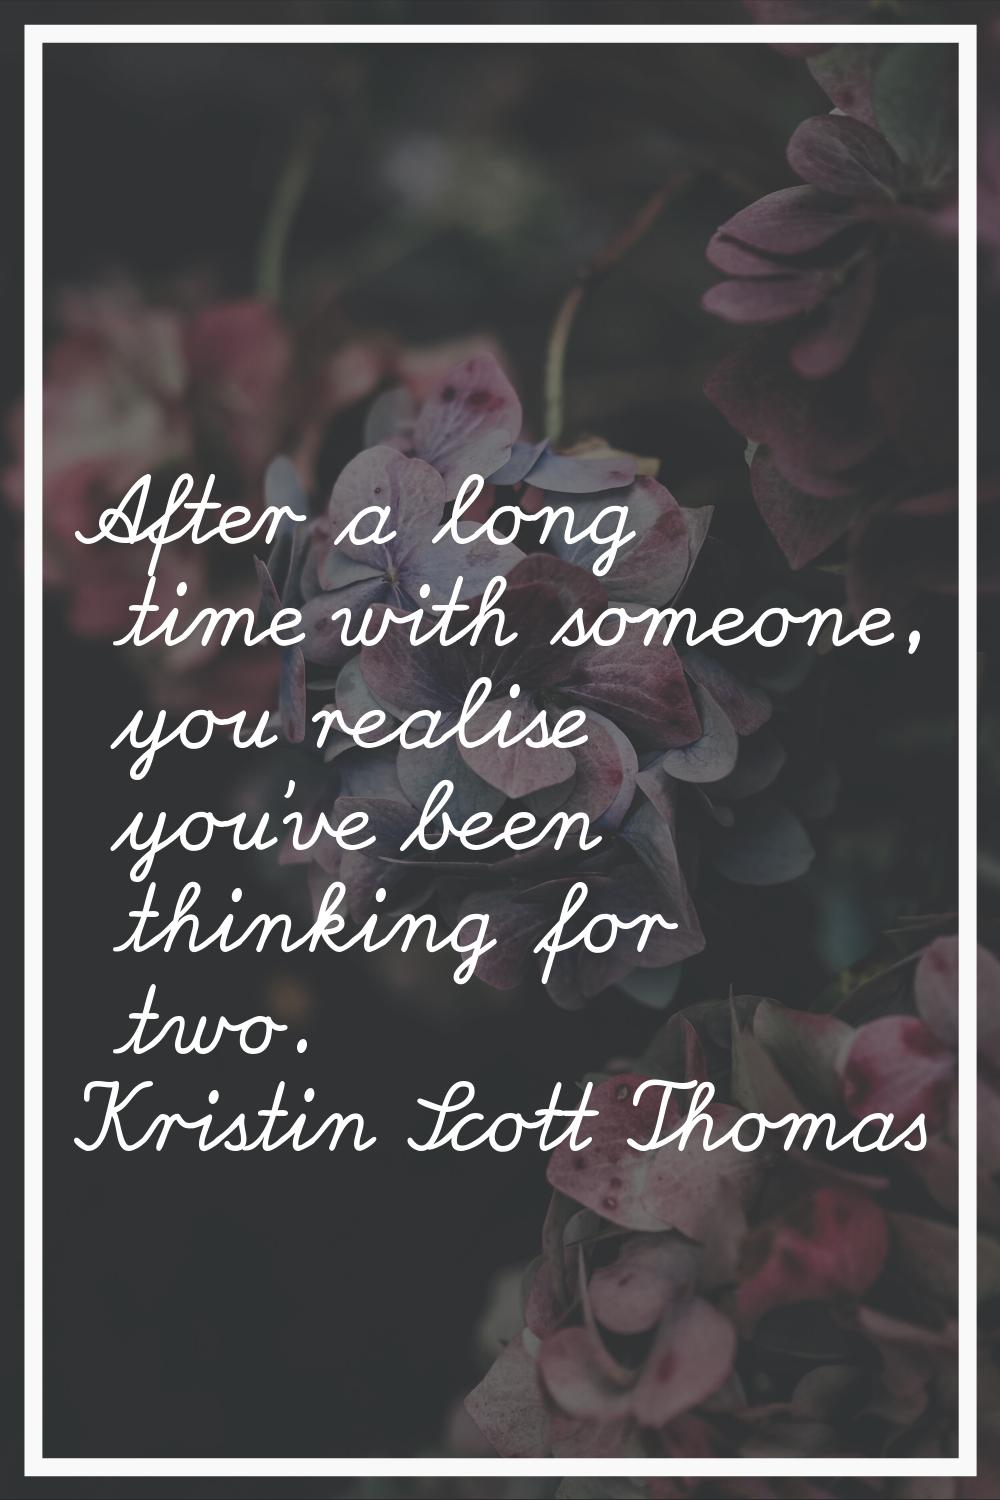 After a long time with someone, you realise you've been thinking for two.